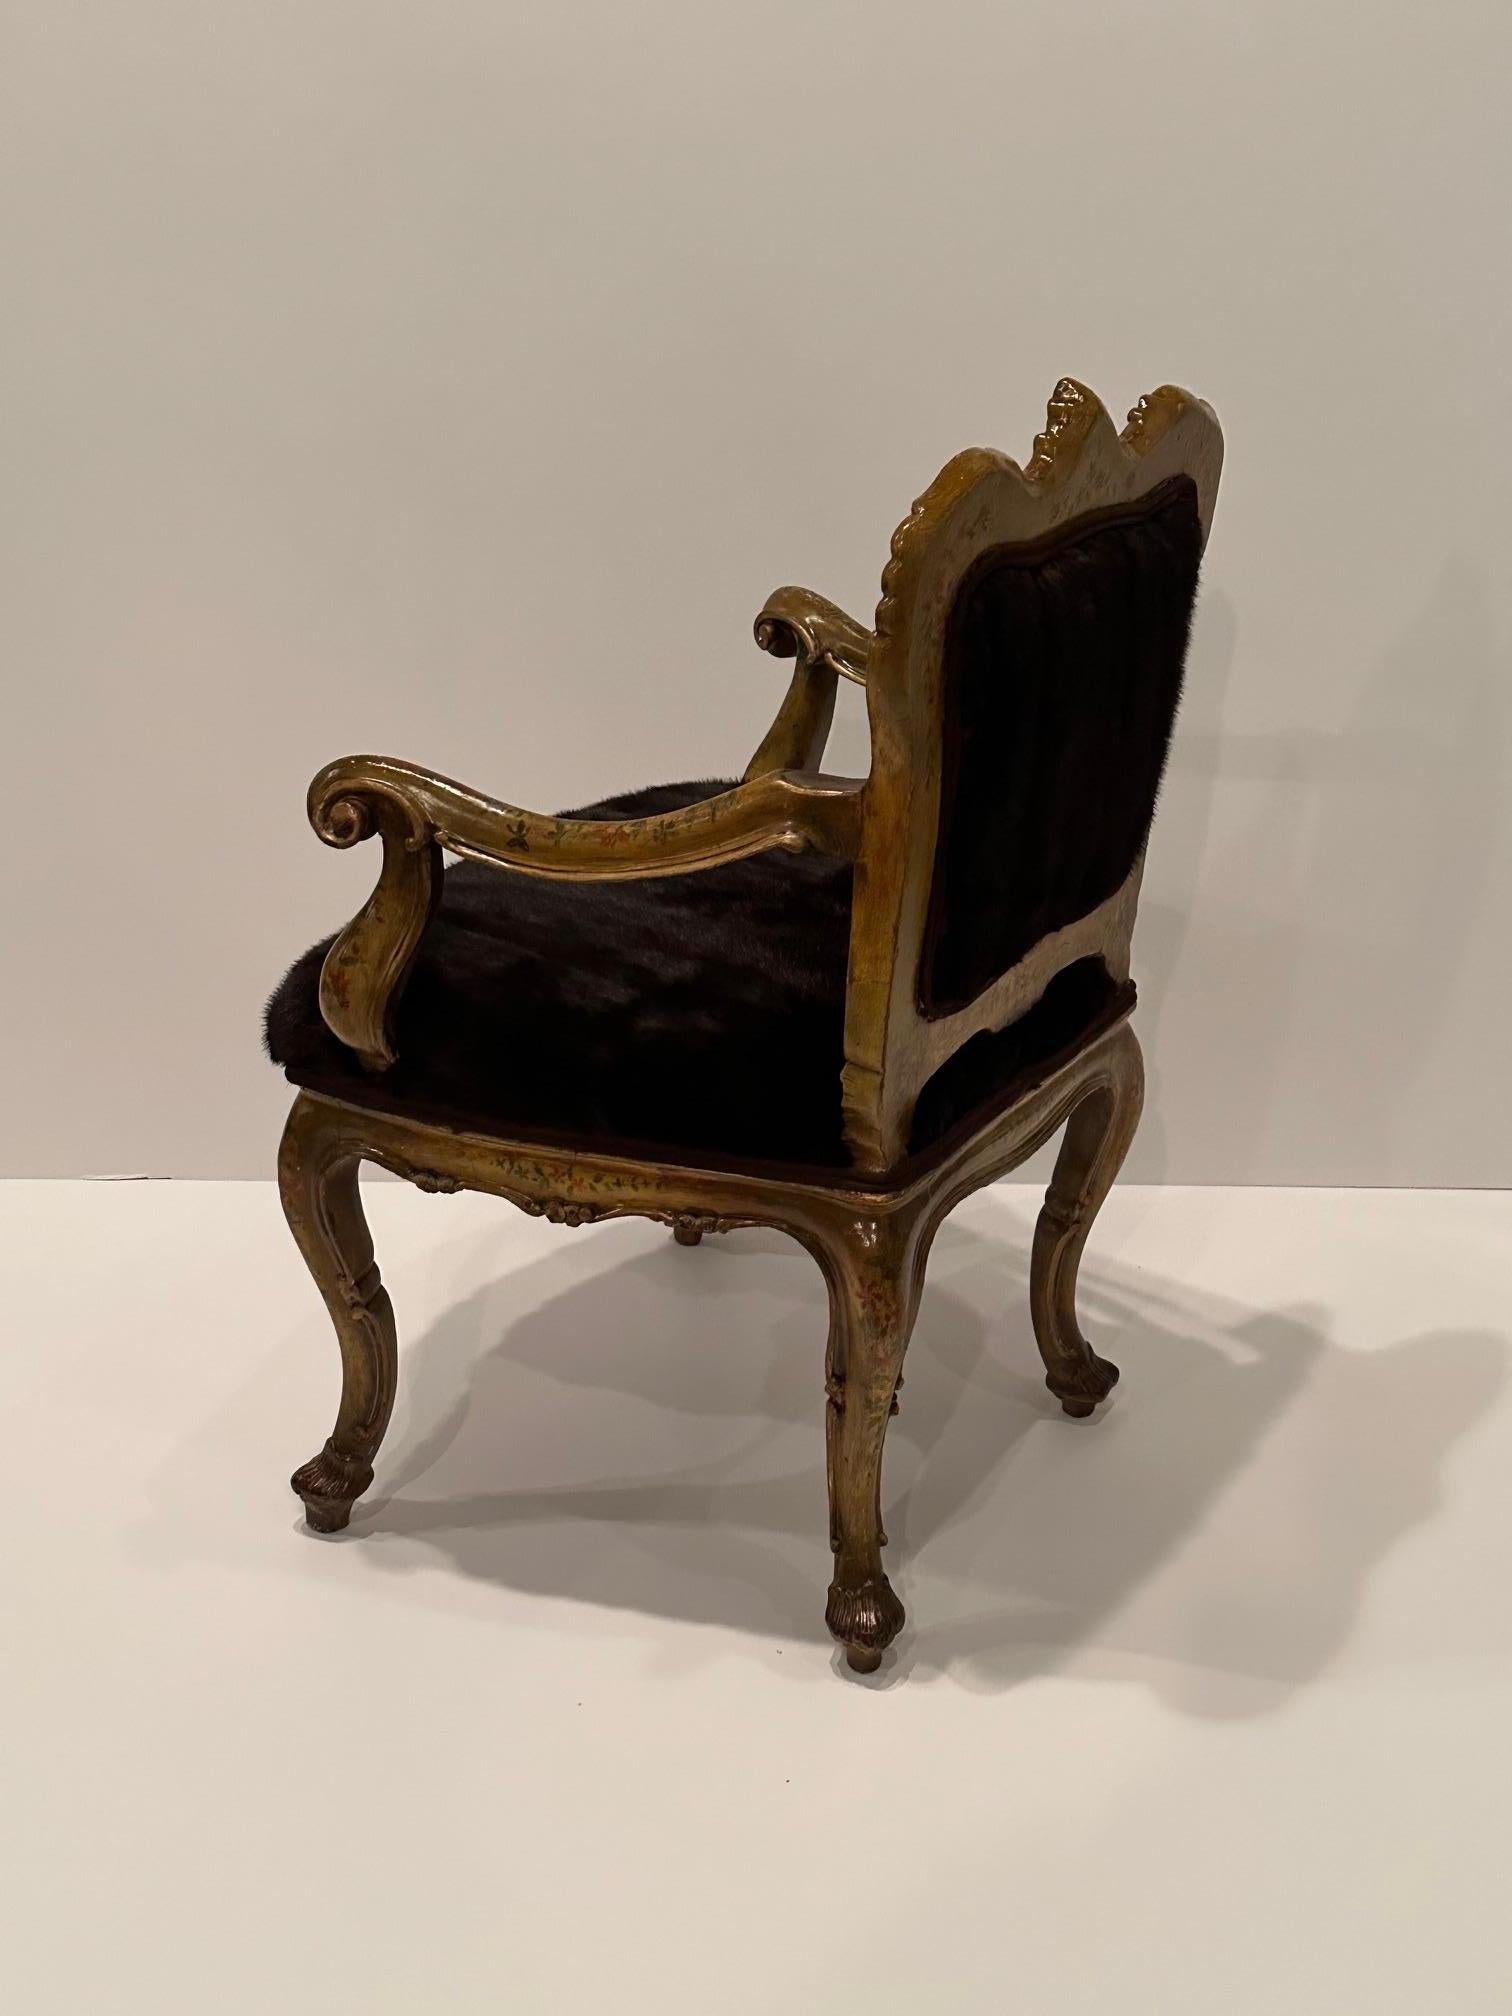 Sinfully Rich Ornate Italian Painted Venetian Armchair Upholstered in Mink Fur In Good Condition For Sale In Hopewell, NJ